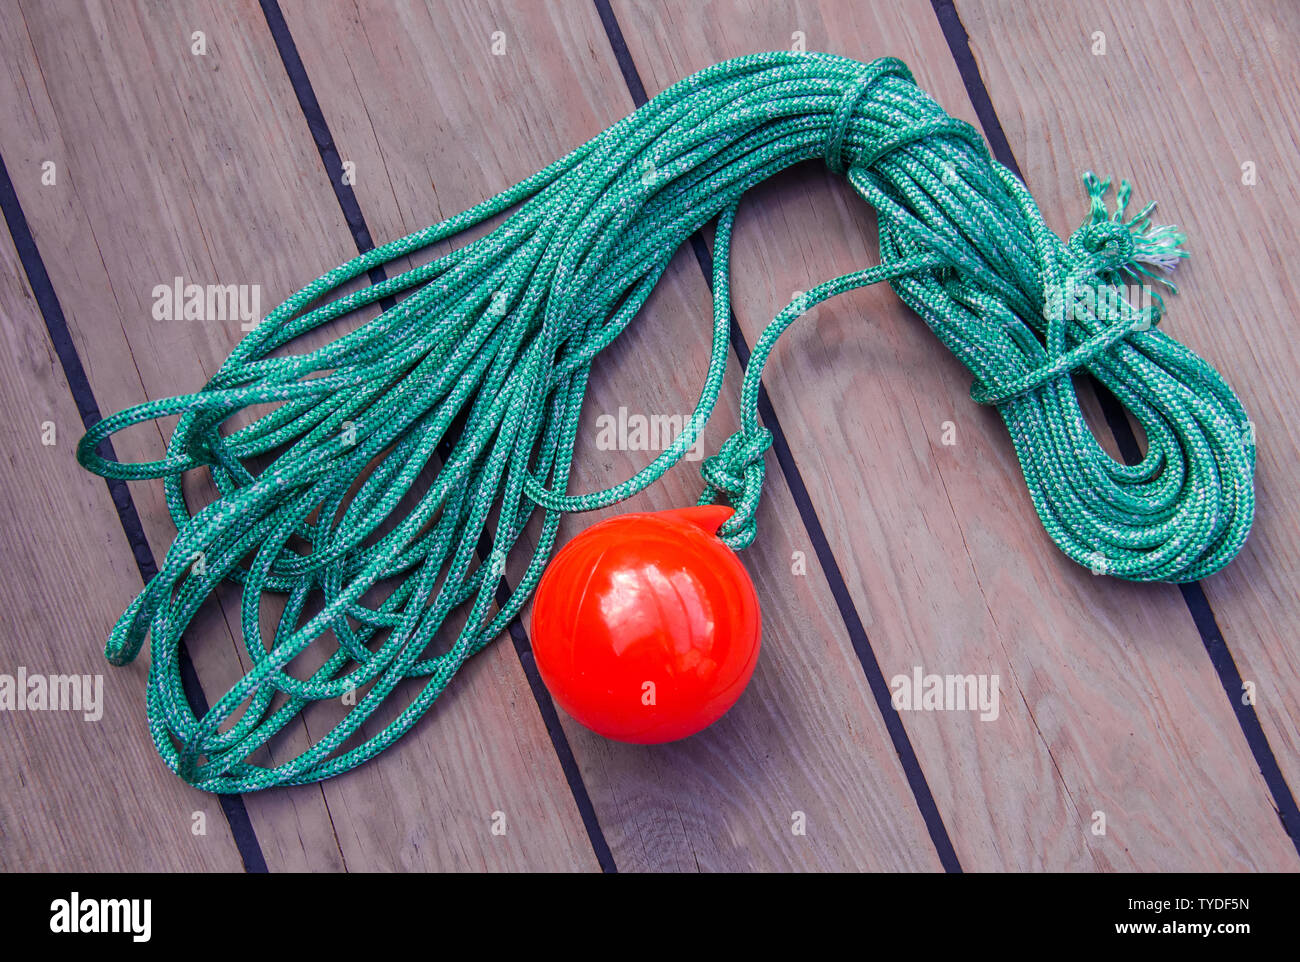 tackle to facilitate the supply of the mooring cable to the shore. A coil  of thin green rope with a plastic red ball on the end Stock Photo - Alamy